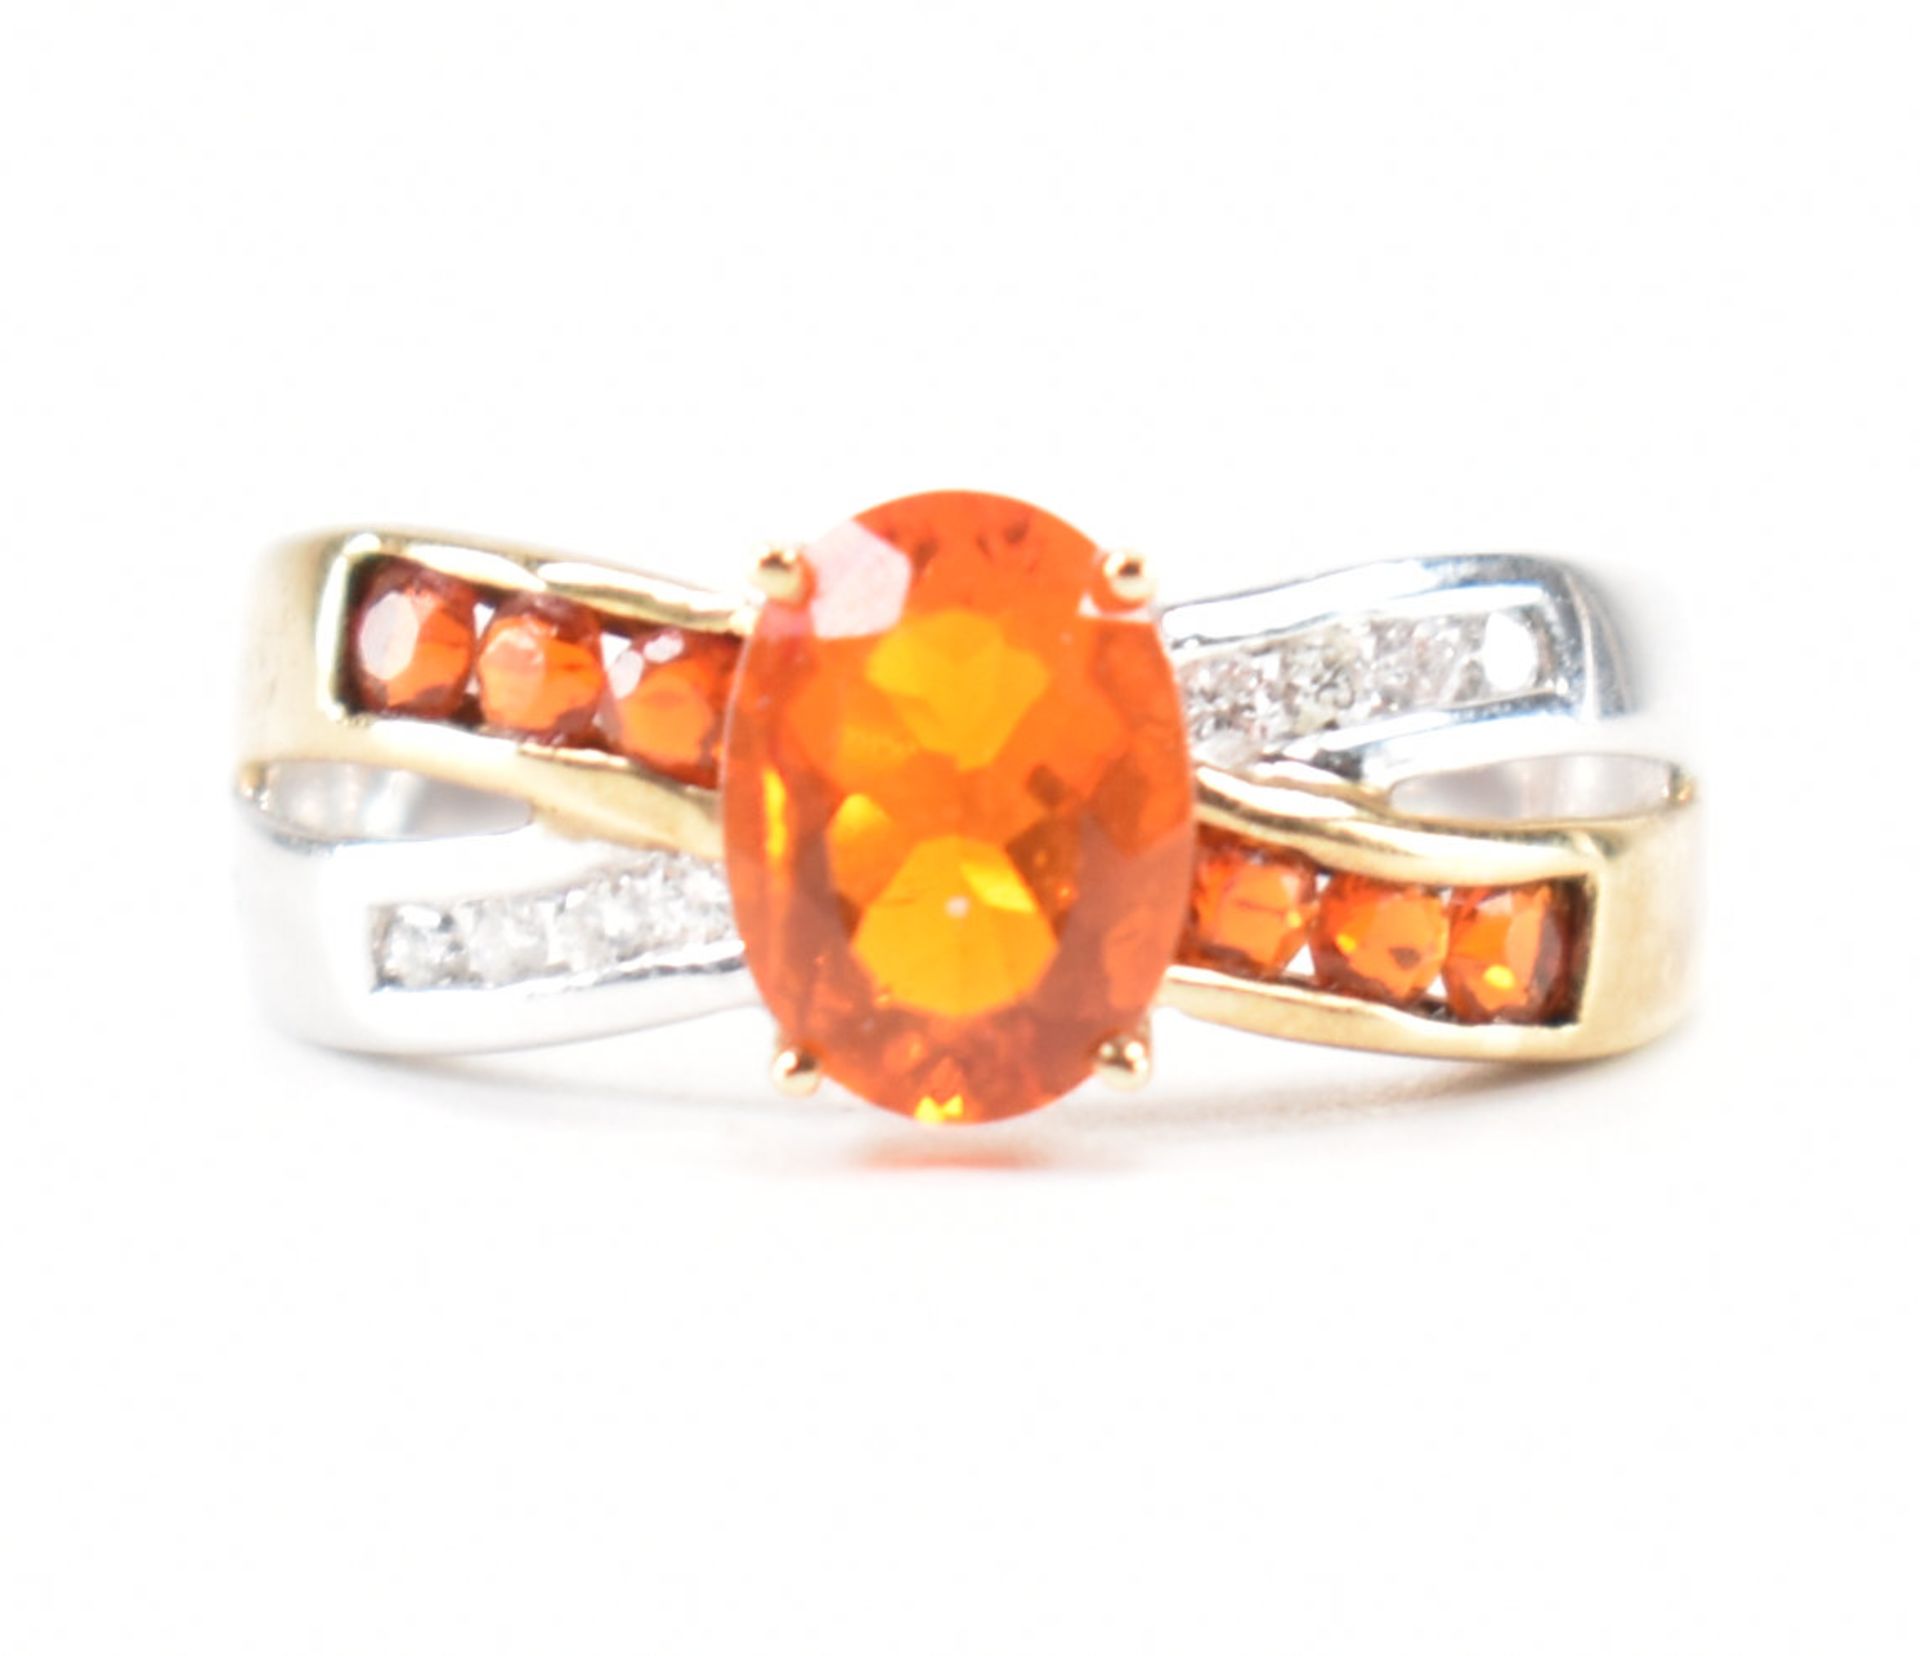 HALLMARKED 9CT GOLD FIRE OPAL RING